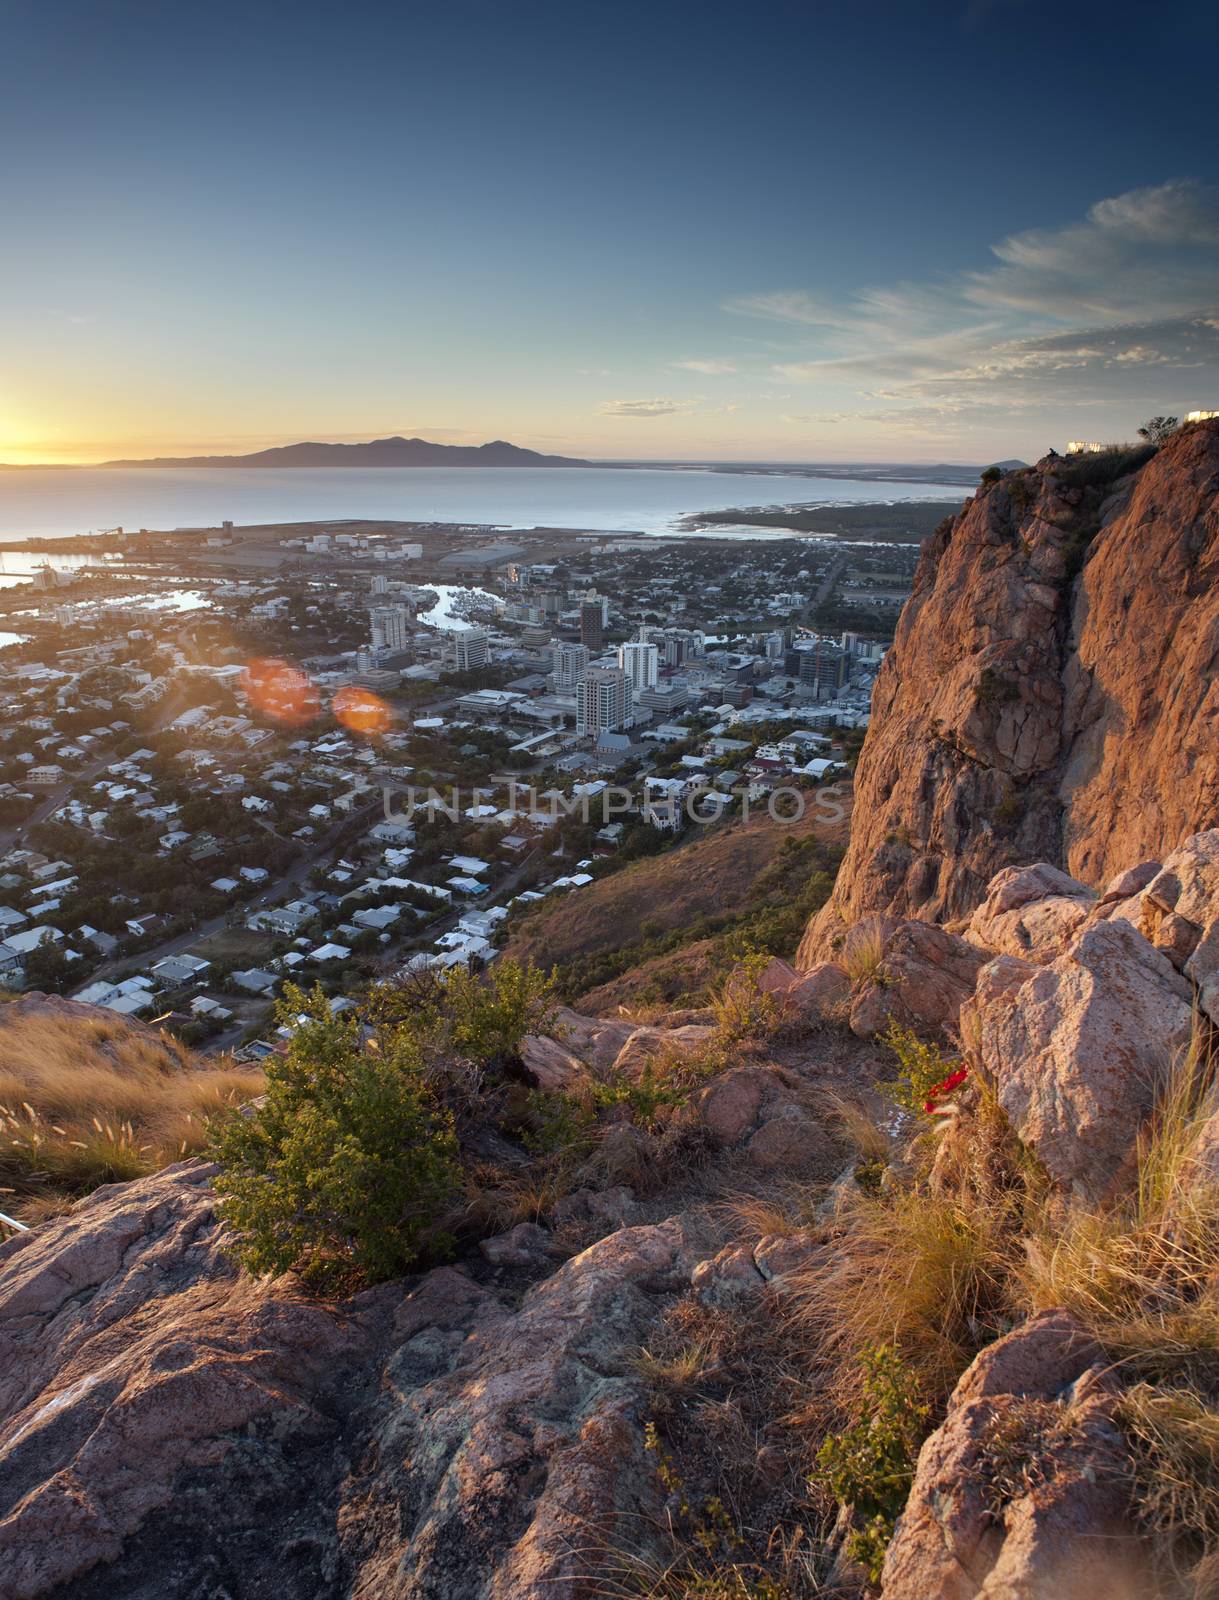 Overview of Townsville, Queensland, Australia from a lookout on a mountain peak over the rooftops of the city to the ocean beyond at sunset